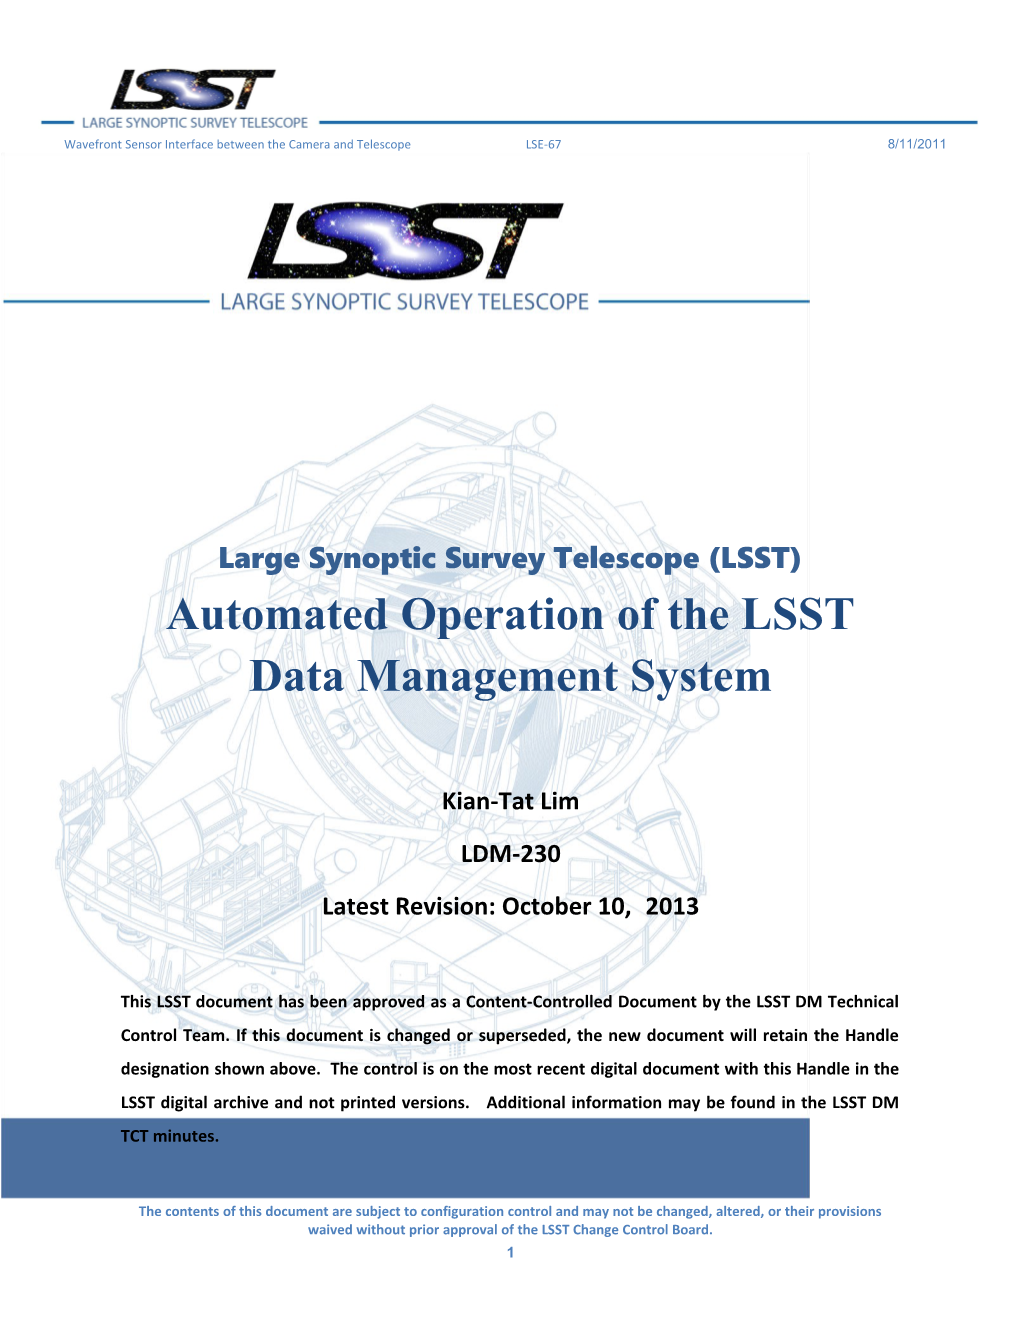 Automated Operation of the LSST Data Management System